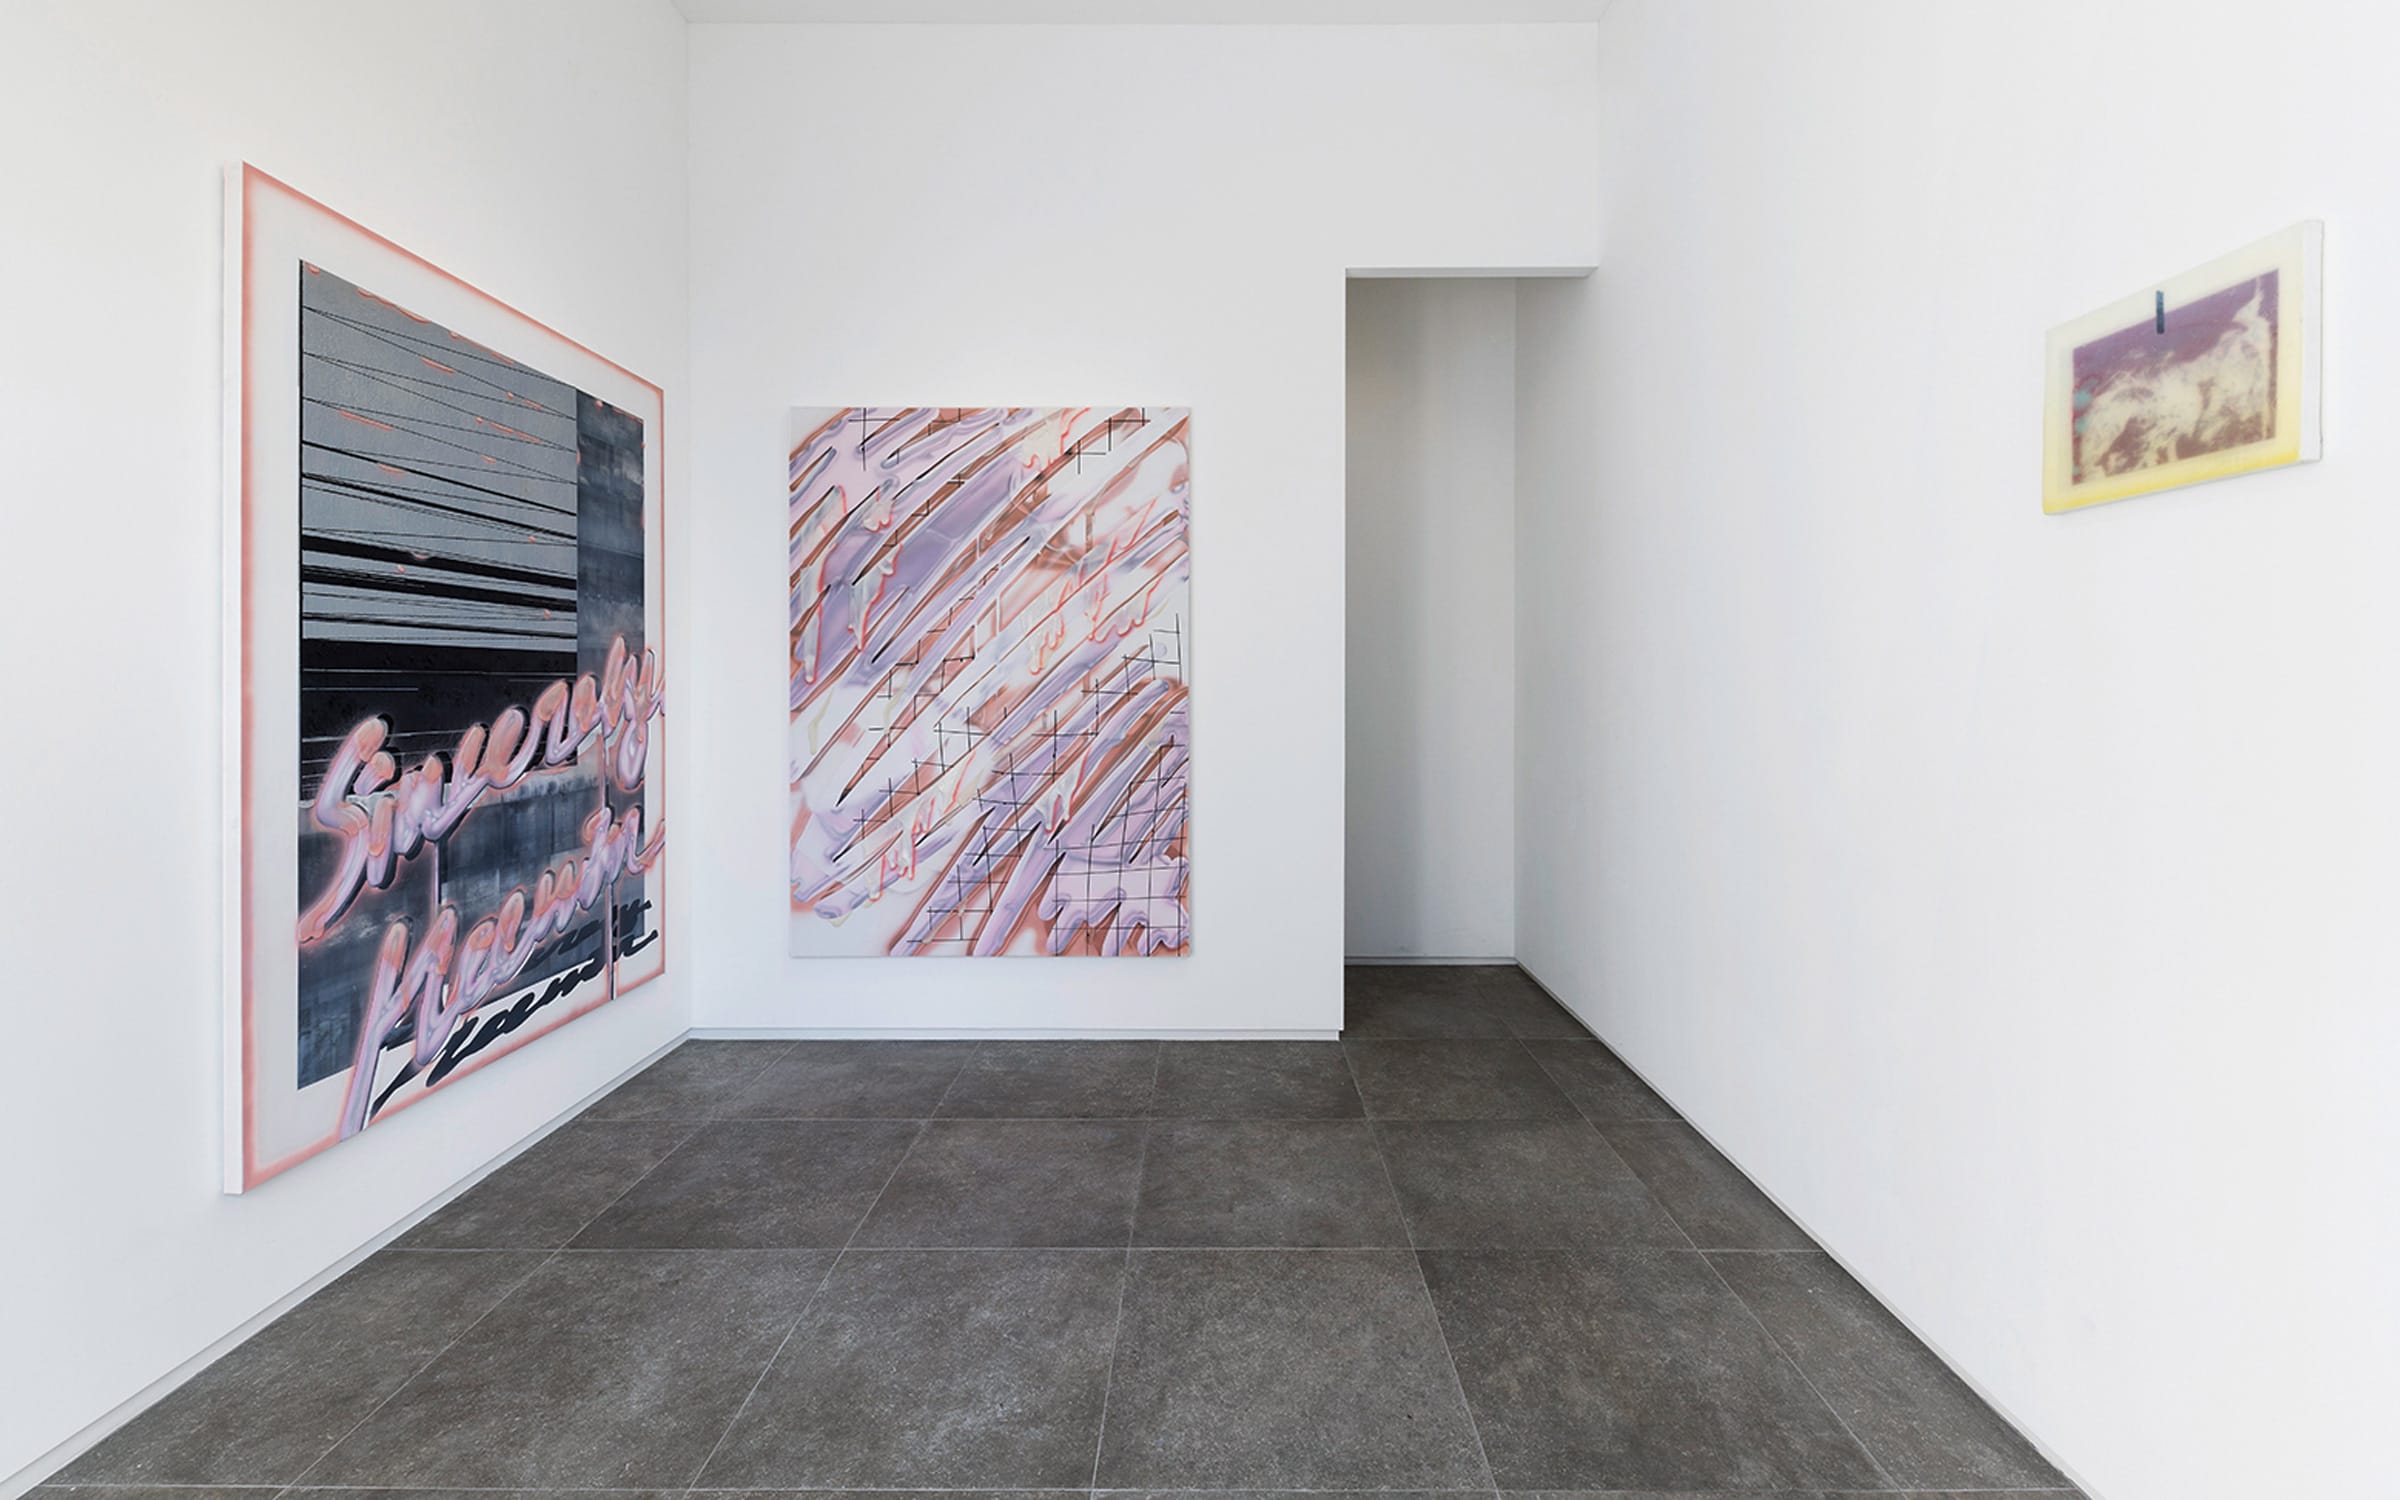 Installation view of Heemin Chung's exhibition 'An Angel Whispers' at P21, Seoul, May 2019. Courtesy of the artist and P21, Seoul.